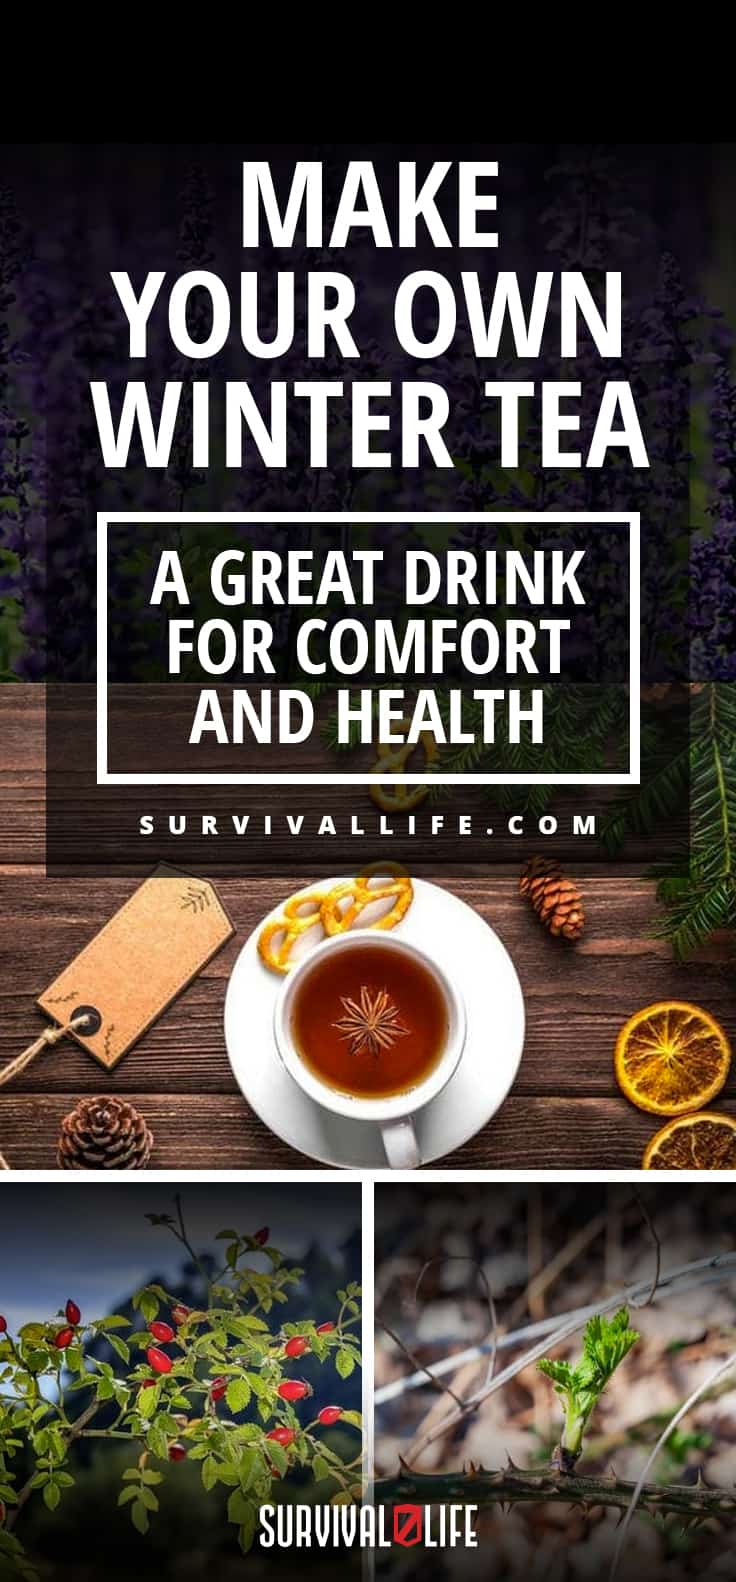 Make Your Own Winter Tea | A Great Drink for Comfort and Health